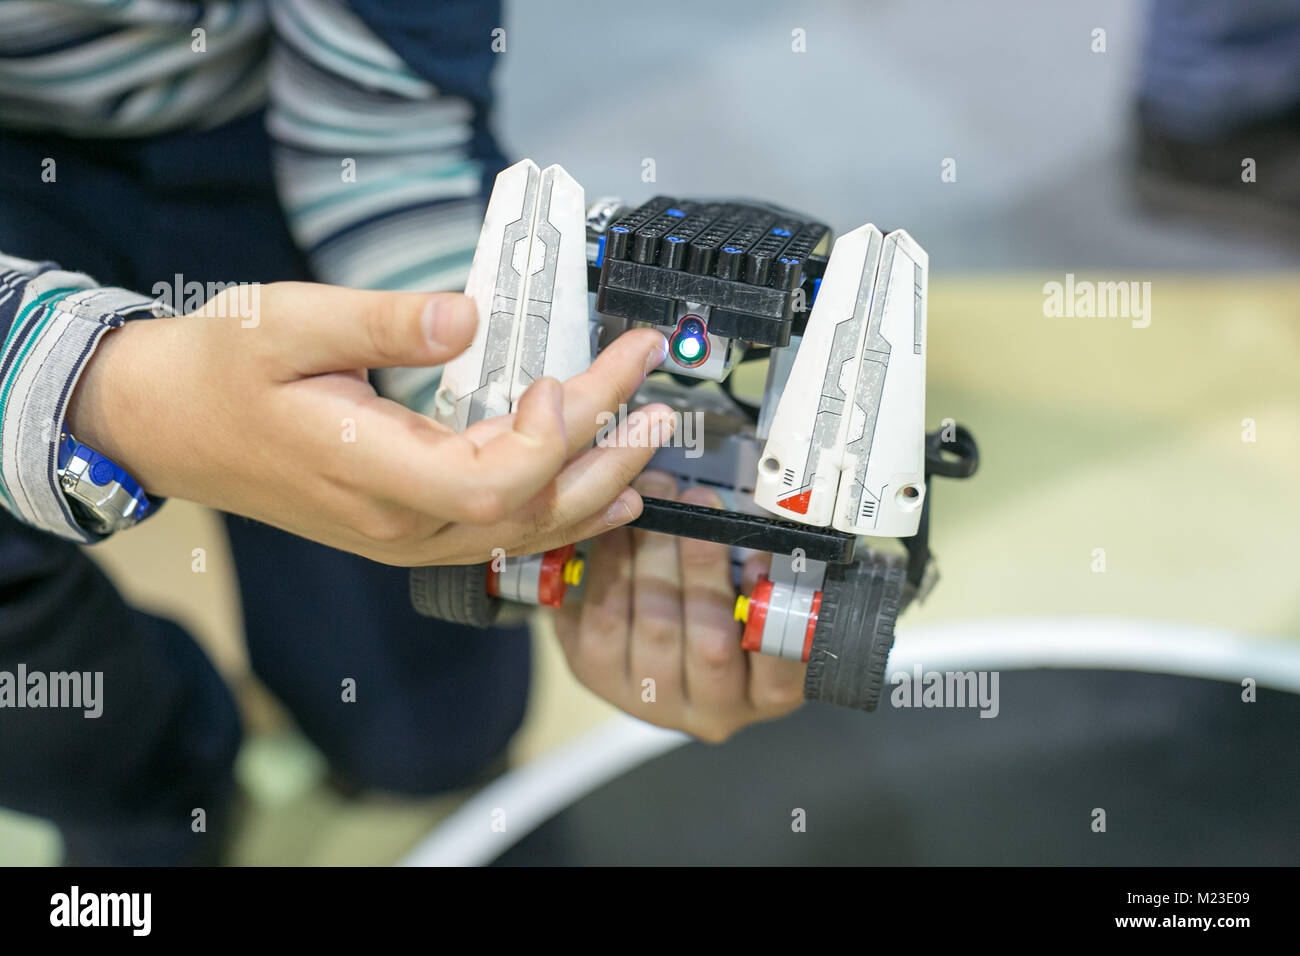 robotics, entertainment, childhood concept. in the arms of small boy there is robot made of lego parts, wheels and electric details for controlling it Stock Photo